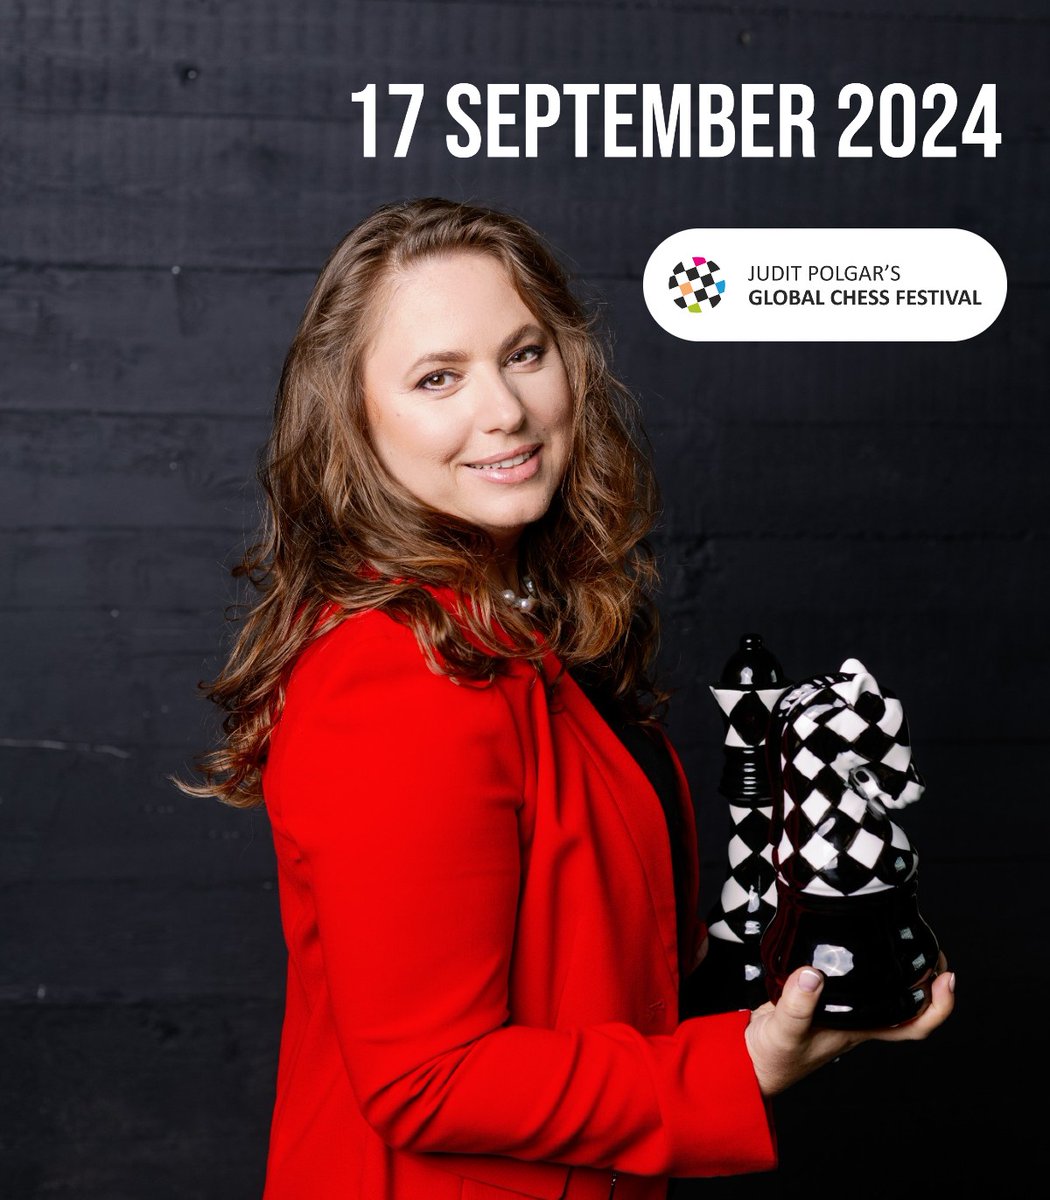 Who or what inspires you❓
A celebrity? - This field will be strong!😉
SAVE THE DATE: 17 September 2024
10th Judit Polgar's Global Chess Festival!
In focus: INSPIRATION
Location: Budapest
#ChessConnectsUs #GCF #chessfeast #fun #culture #society #science #art #education
📷JPCF